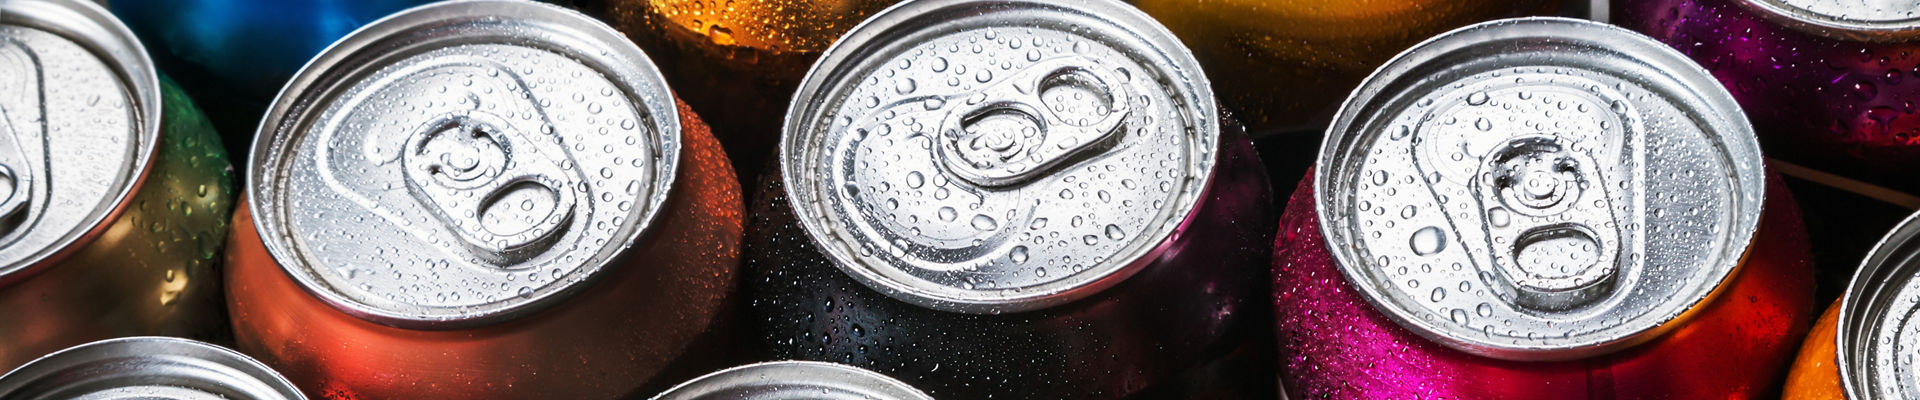 Aluminum cans of soda, view from the top